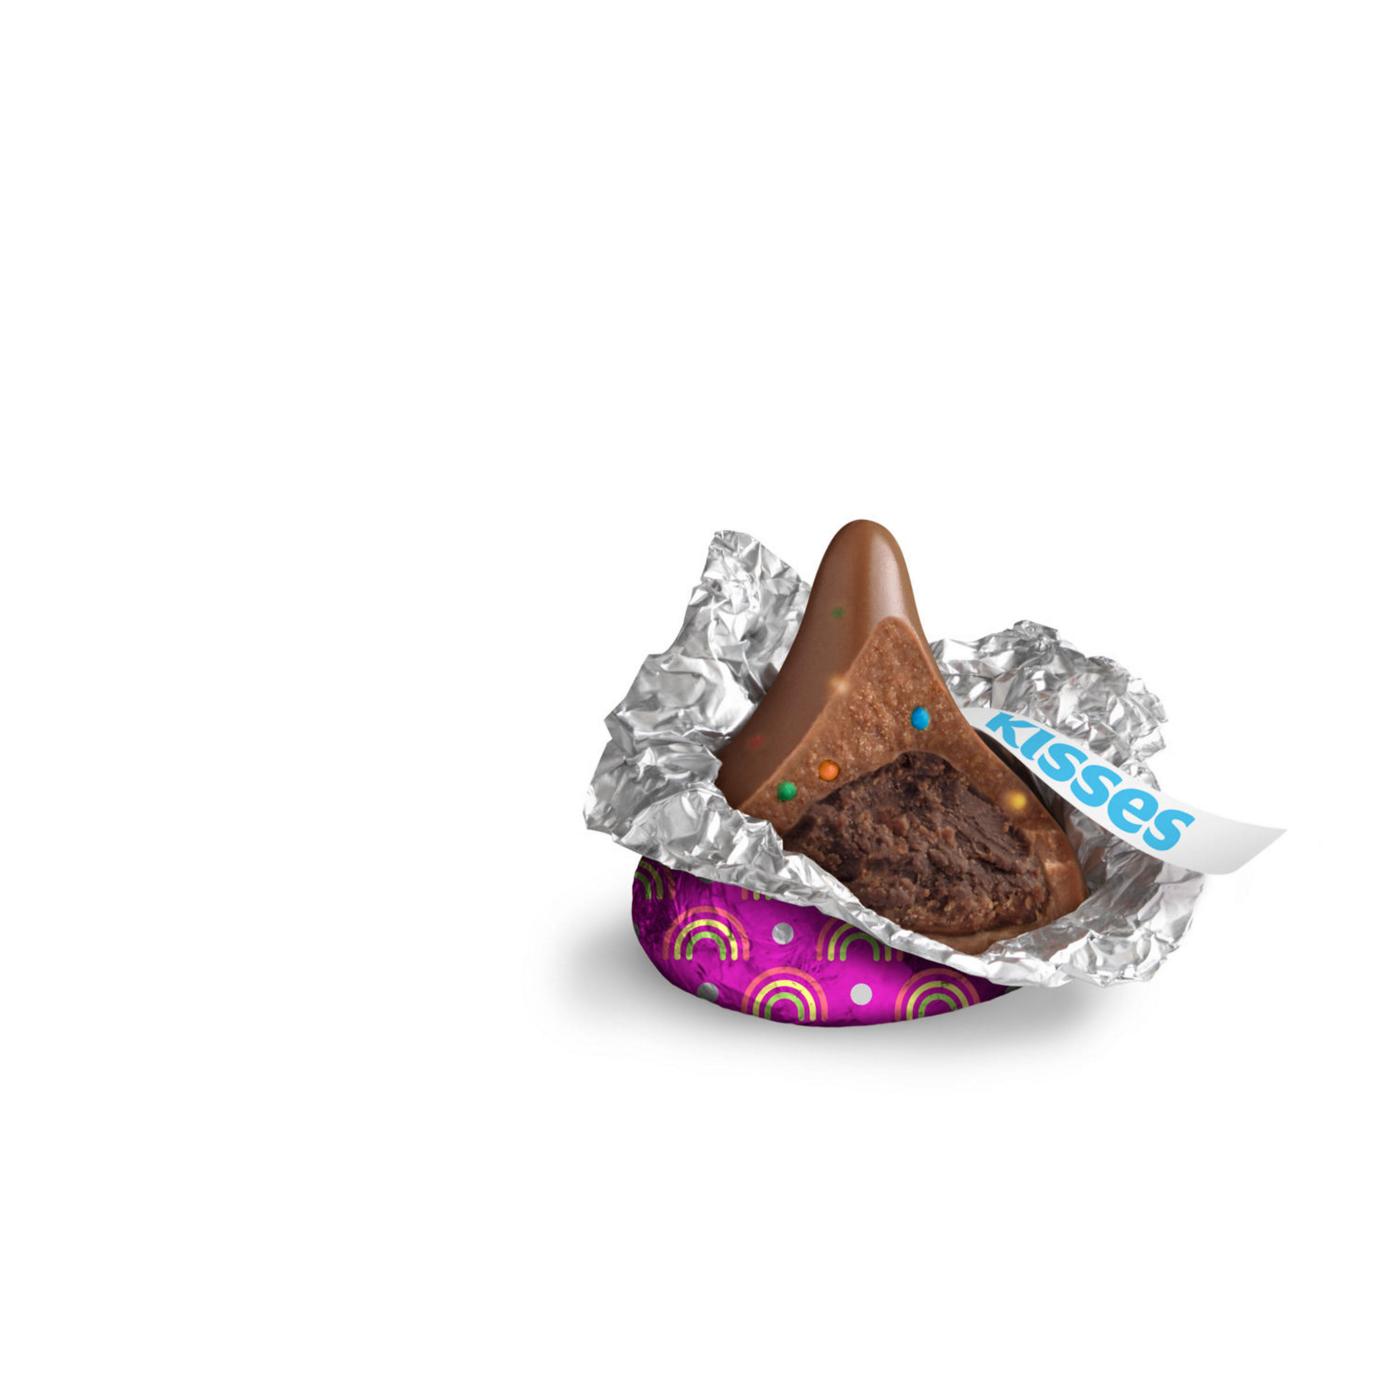 Hershey's Kisses Rainbow Brownie Candy - Share Pack; image 2 of 7